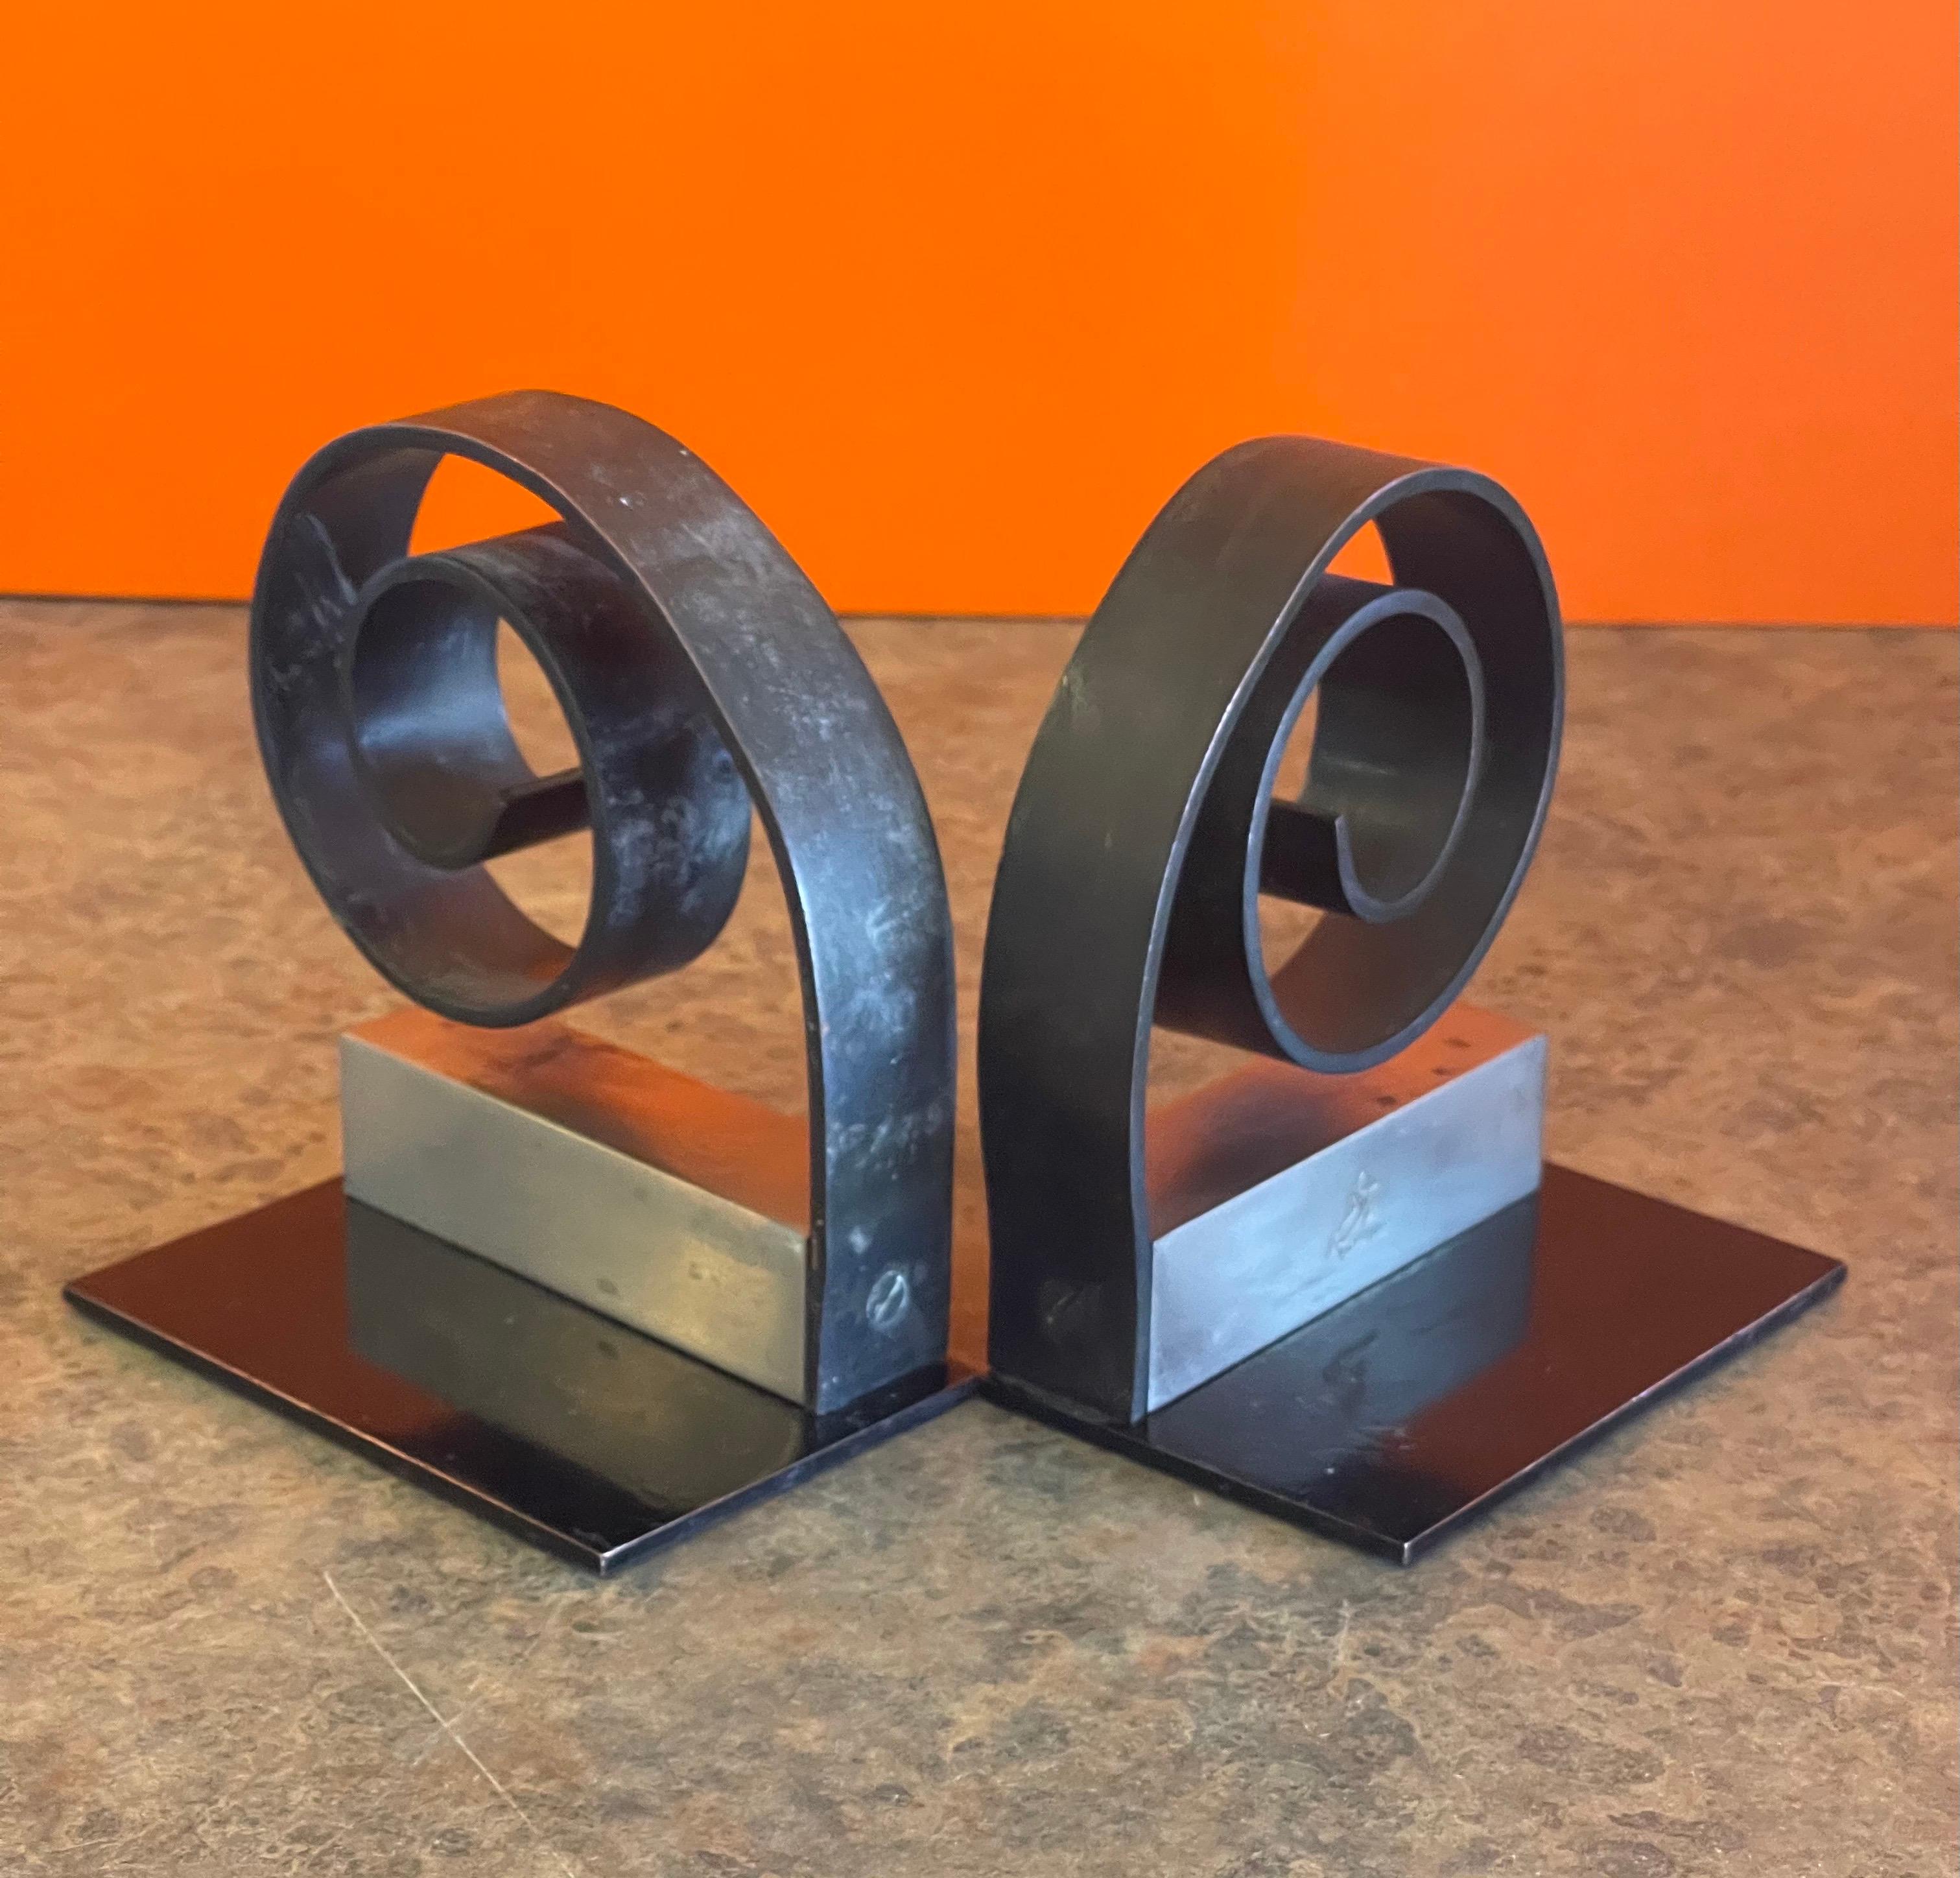 A very nice and hard to find pair of Machine Age / Art Deco / Streamline bookends by Walter Von Nessen for Chase & Co., circa 1930s. These are solid nickel bookends with a circular spiral plinth (painted black) on a square back. The pieces feature